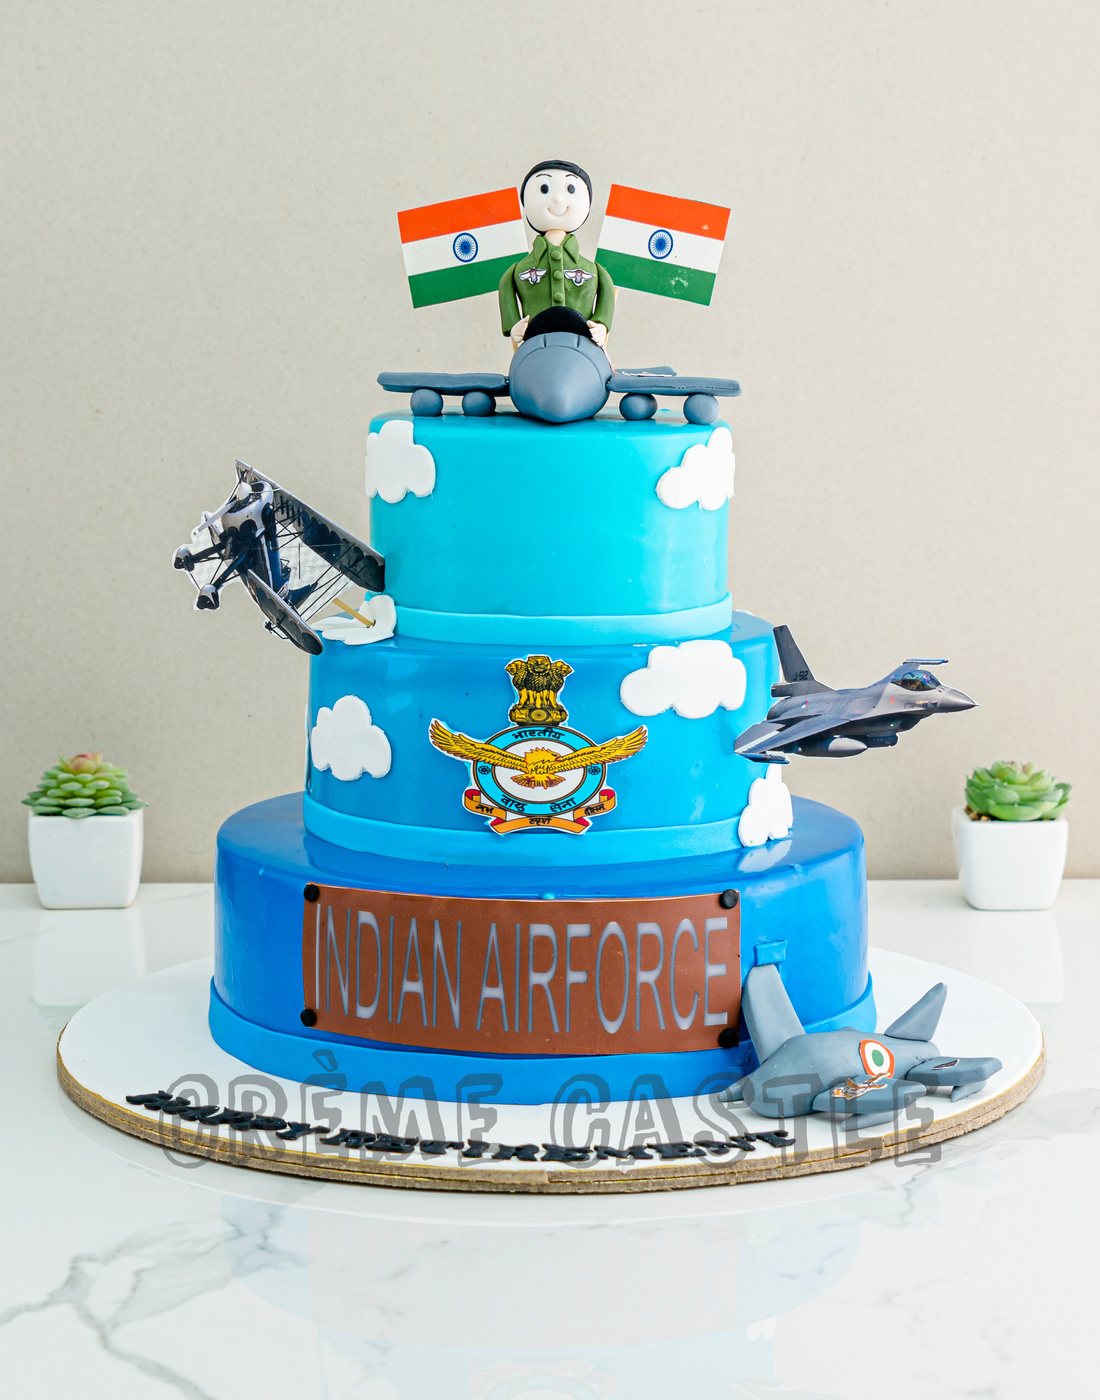 Air Force Flag Cake - Decorated Cake by Cathy Leavitt - CakesDecor